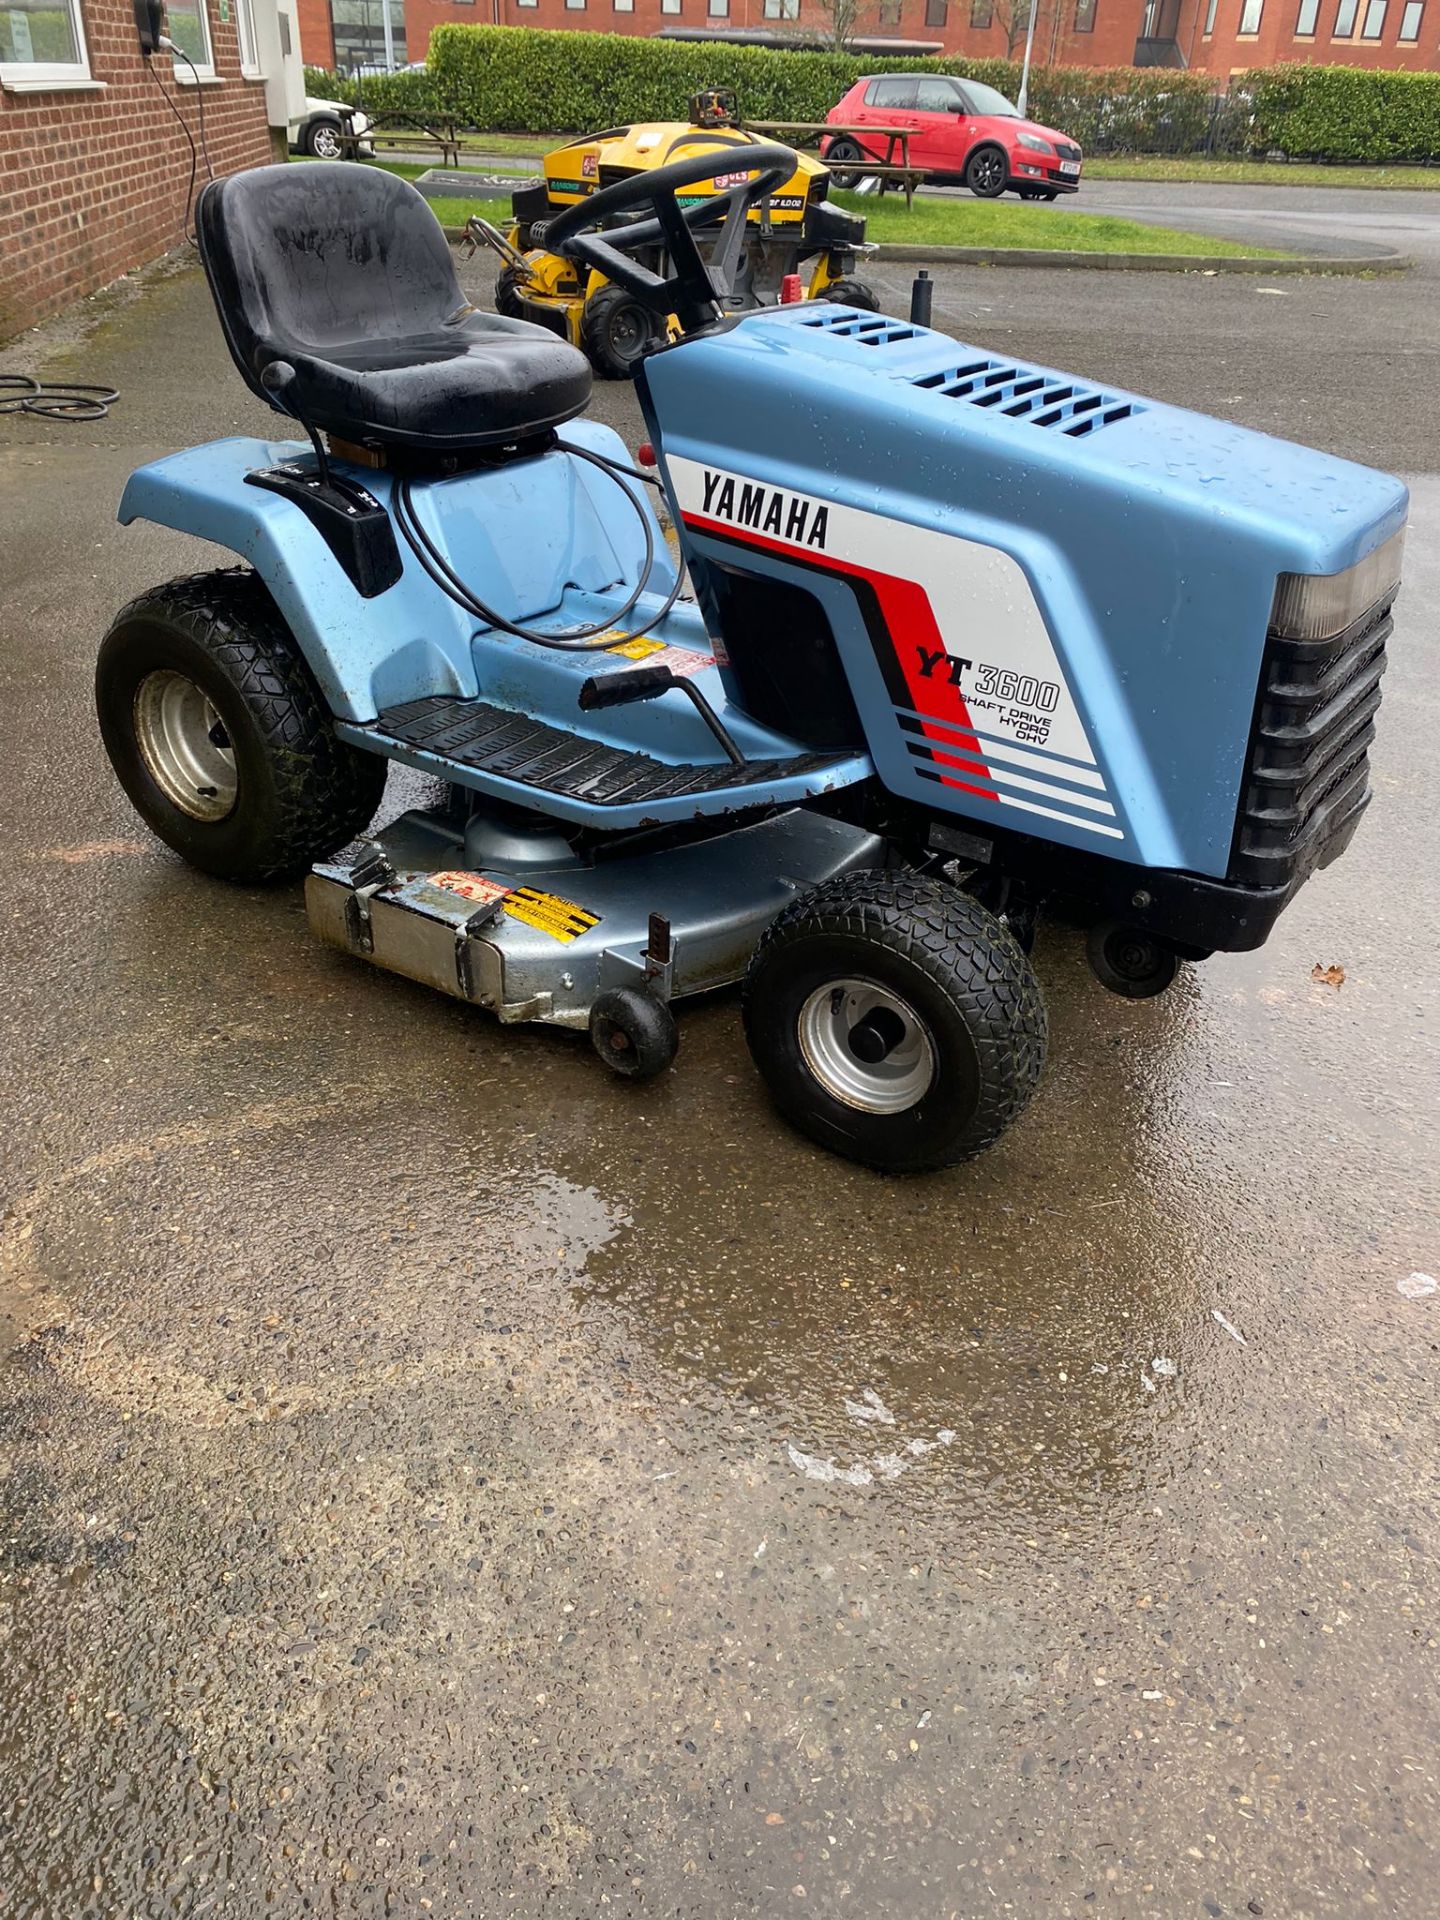 YAMAHA YT3600 RIDE ON MOWER VINTAGE WITH KEYS AND MANUAL - Image 2 of 5